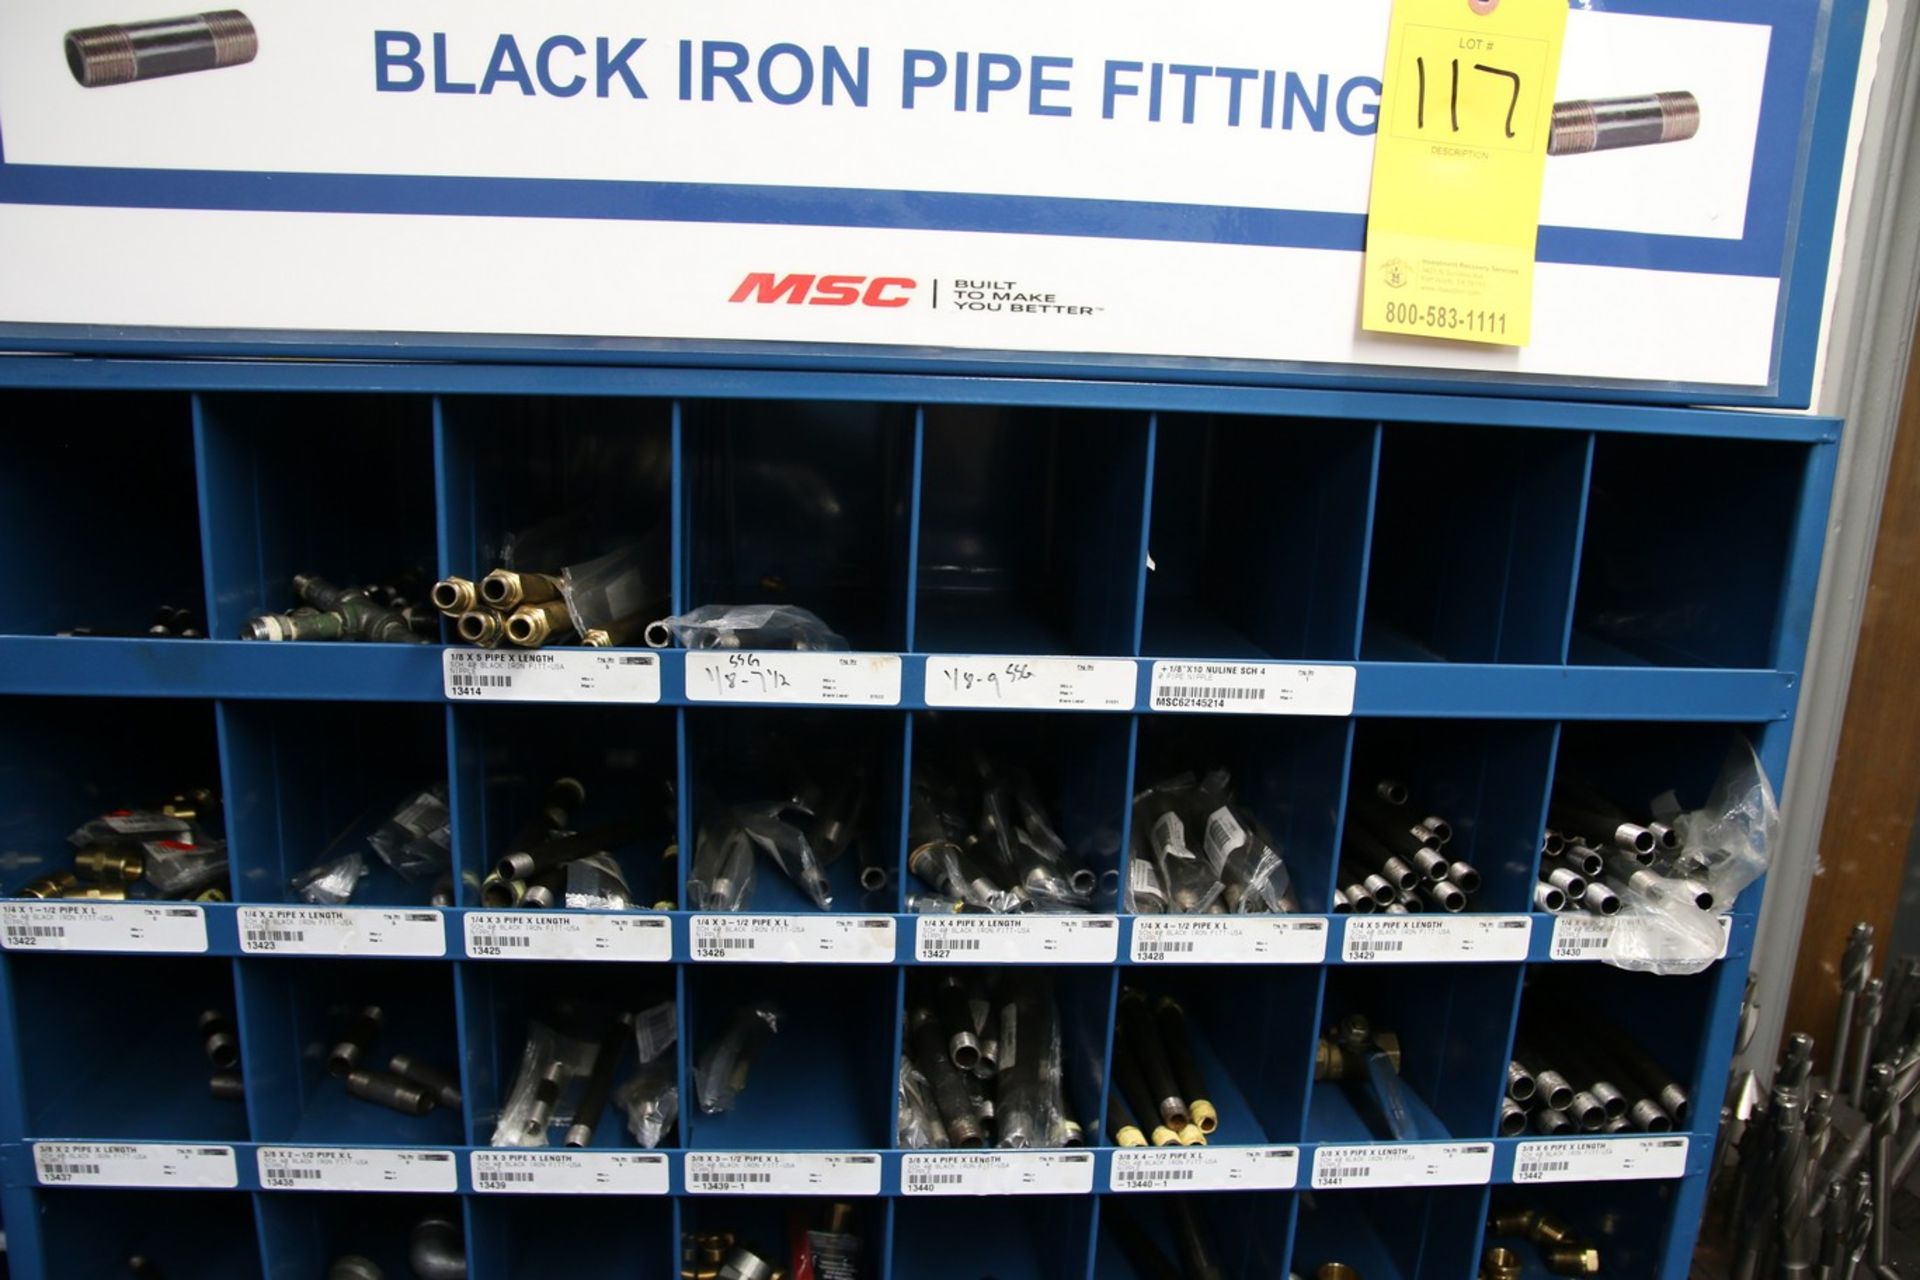 Steel Hardware Bins with Black Iron Pipe Fittings - Image 2 of 4